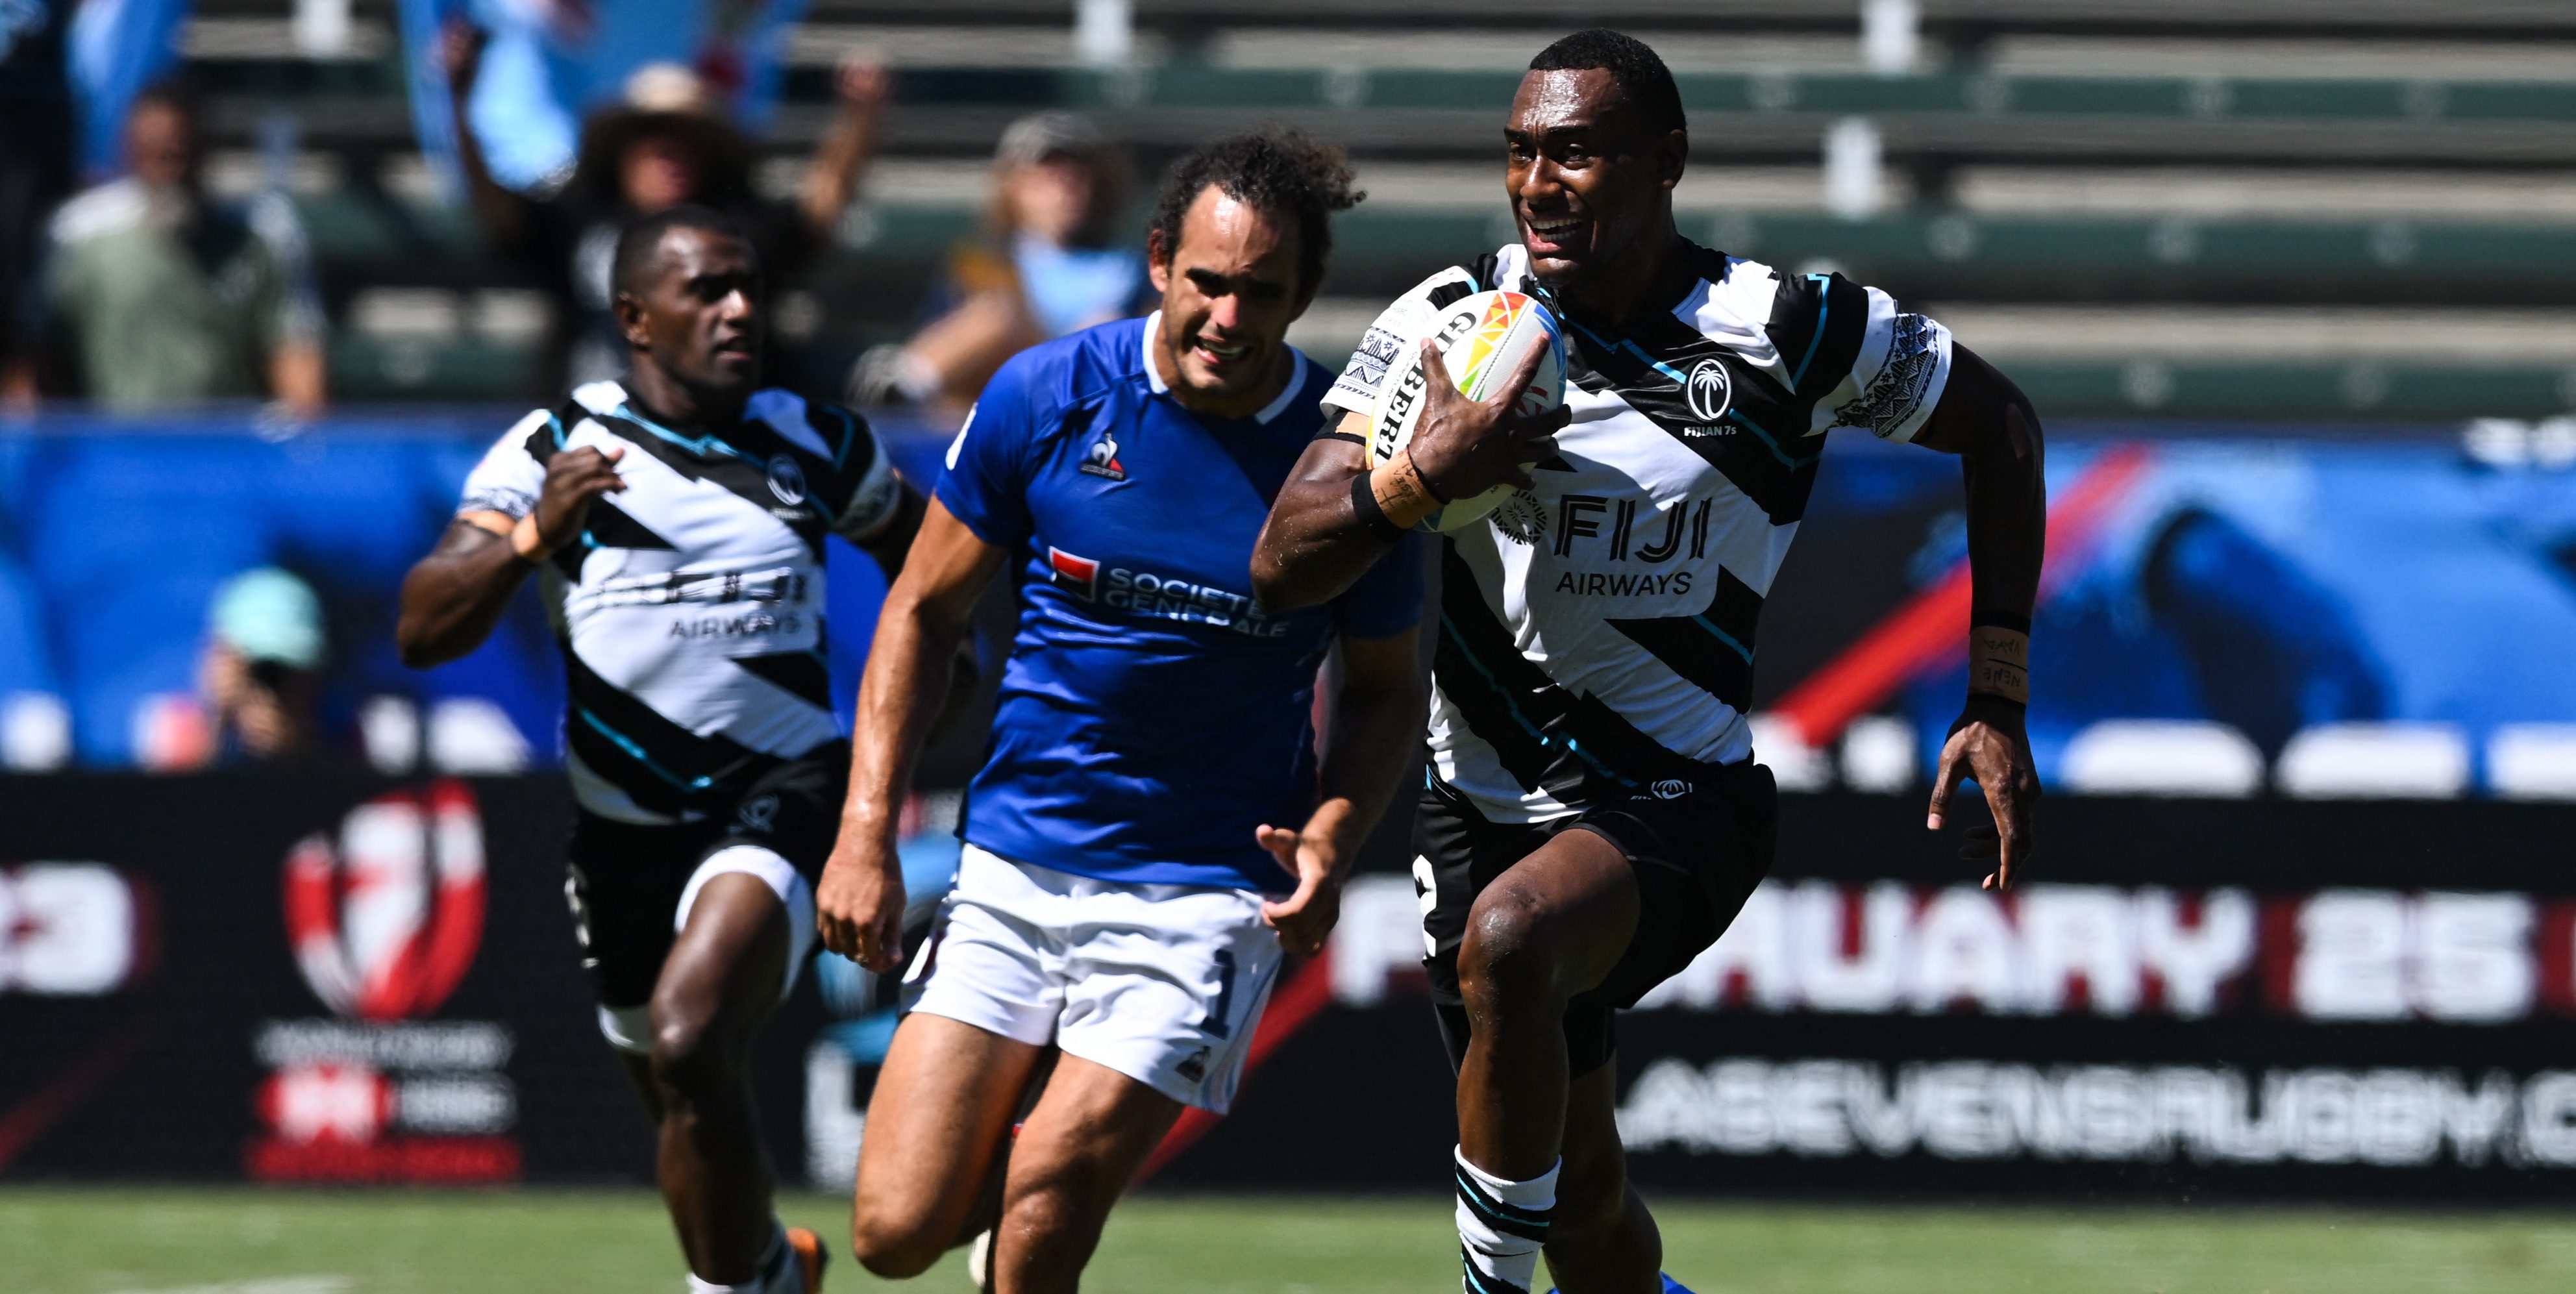 Looking Ahead to 2022-23 HSBC Rugby Sevens Series Dates, Locations